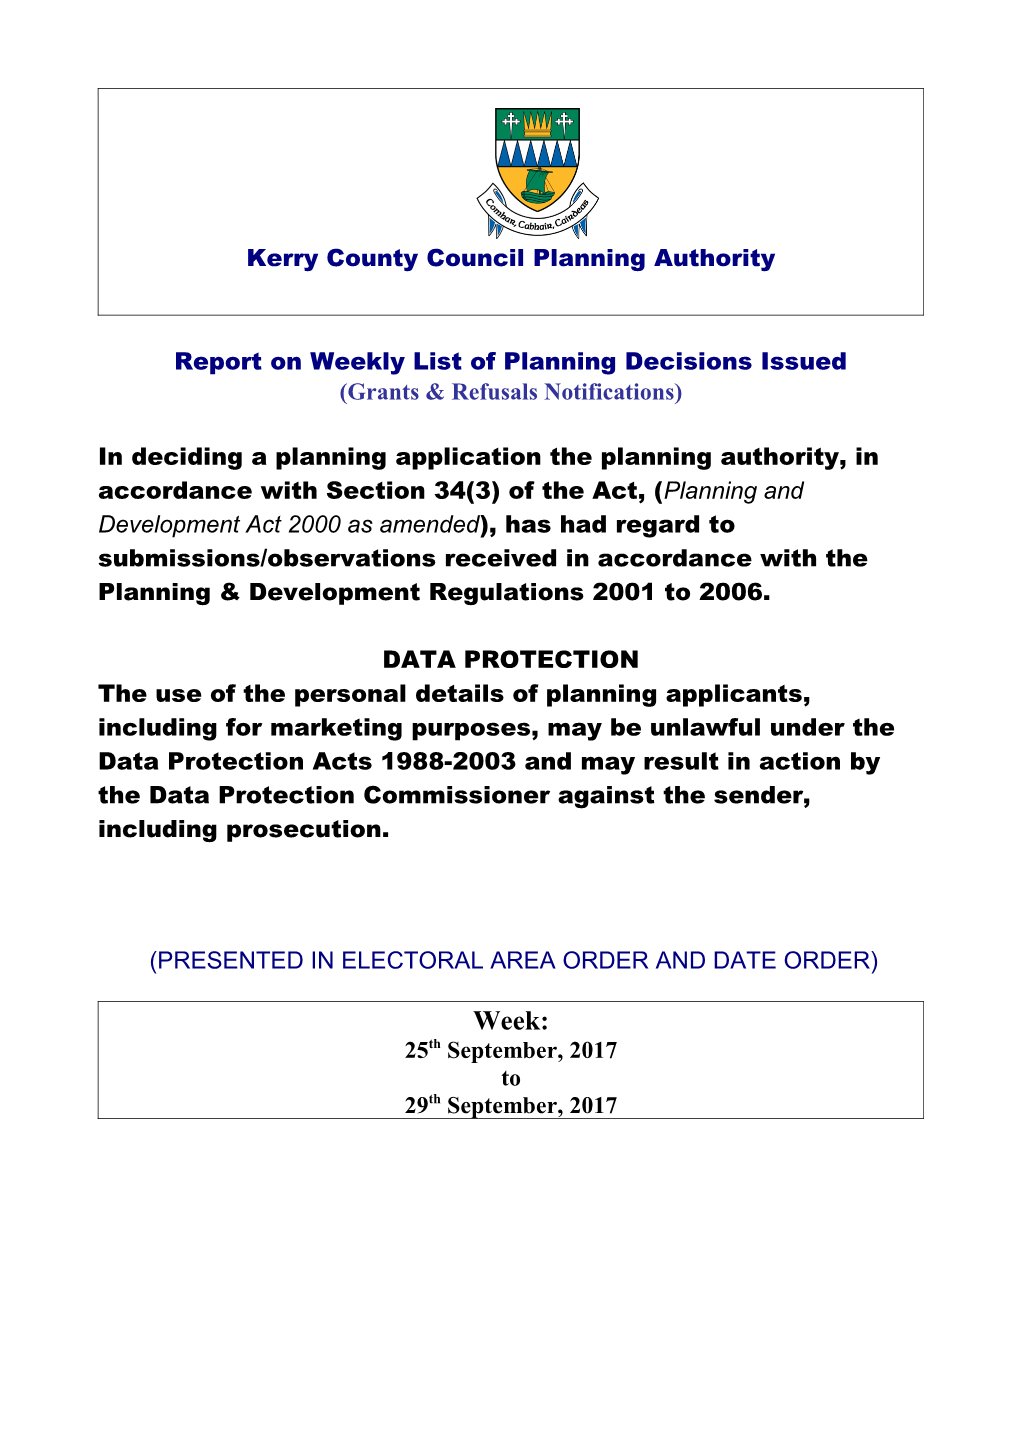 Kerry County Council Planning Authority